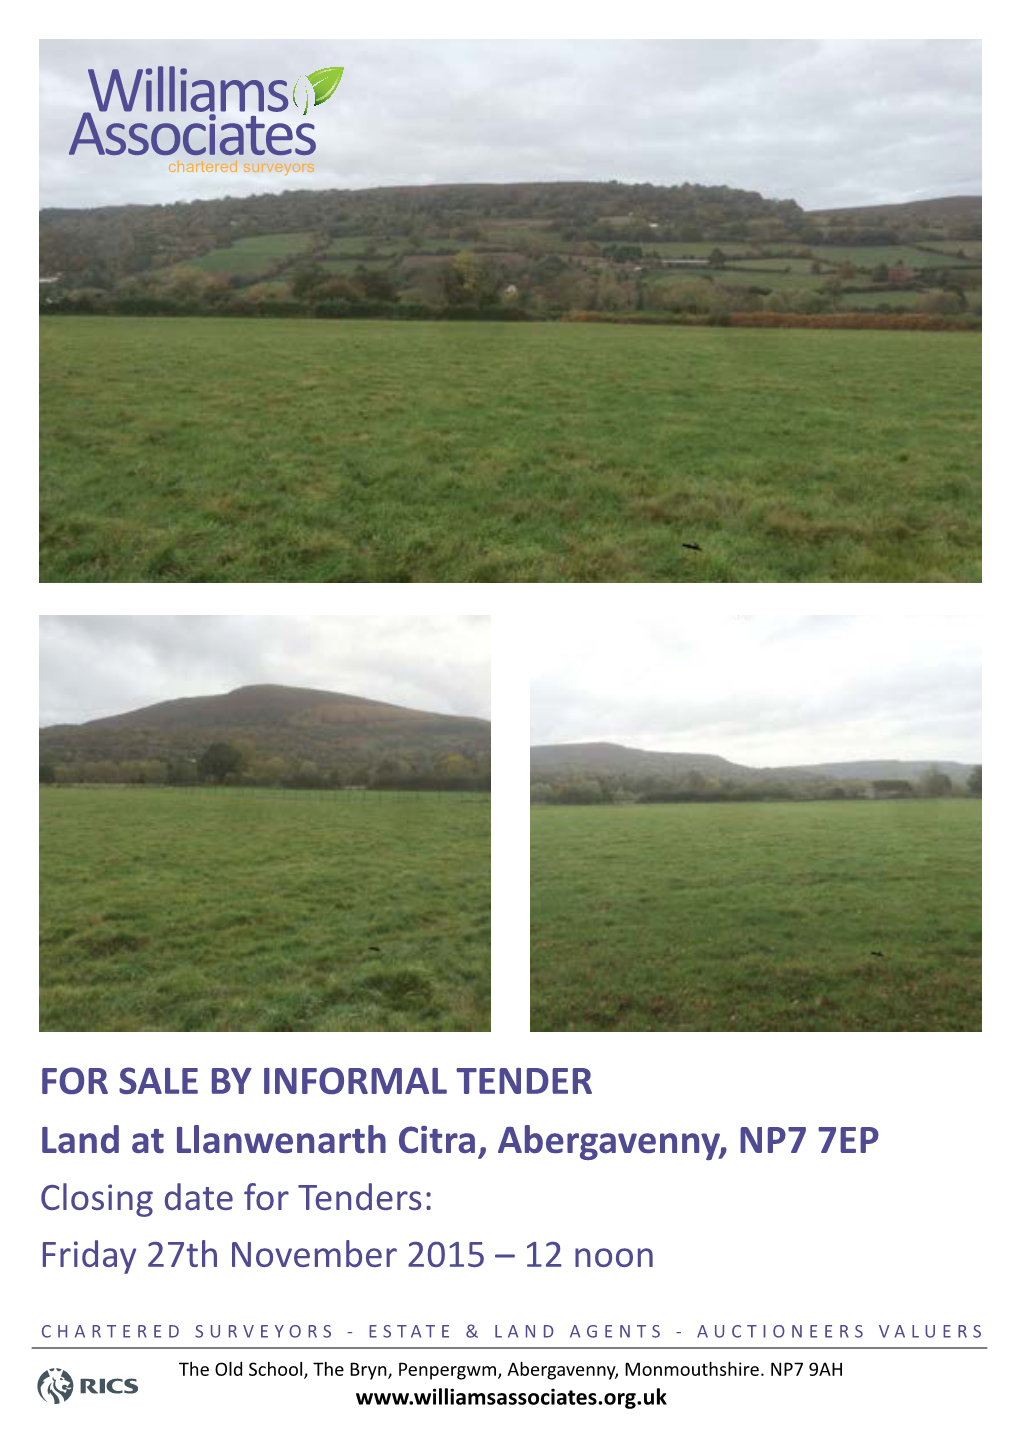 FOR SALE by INFORMAL TENDER Land at Llanwenarth Citra, Abergavenny, NP7 7EP Closing Date for Tenders: Friday 27Th November 2015 – 12 Noon